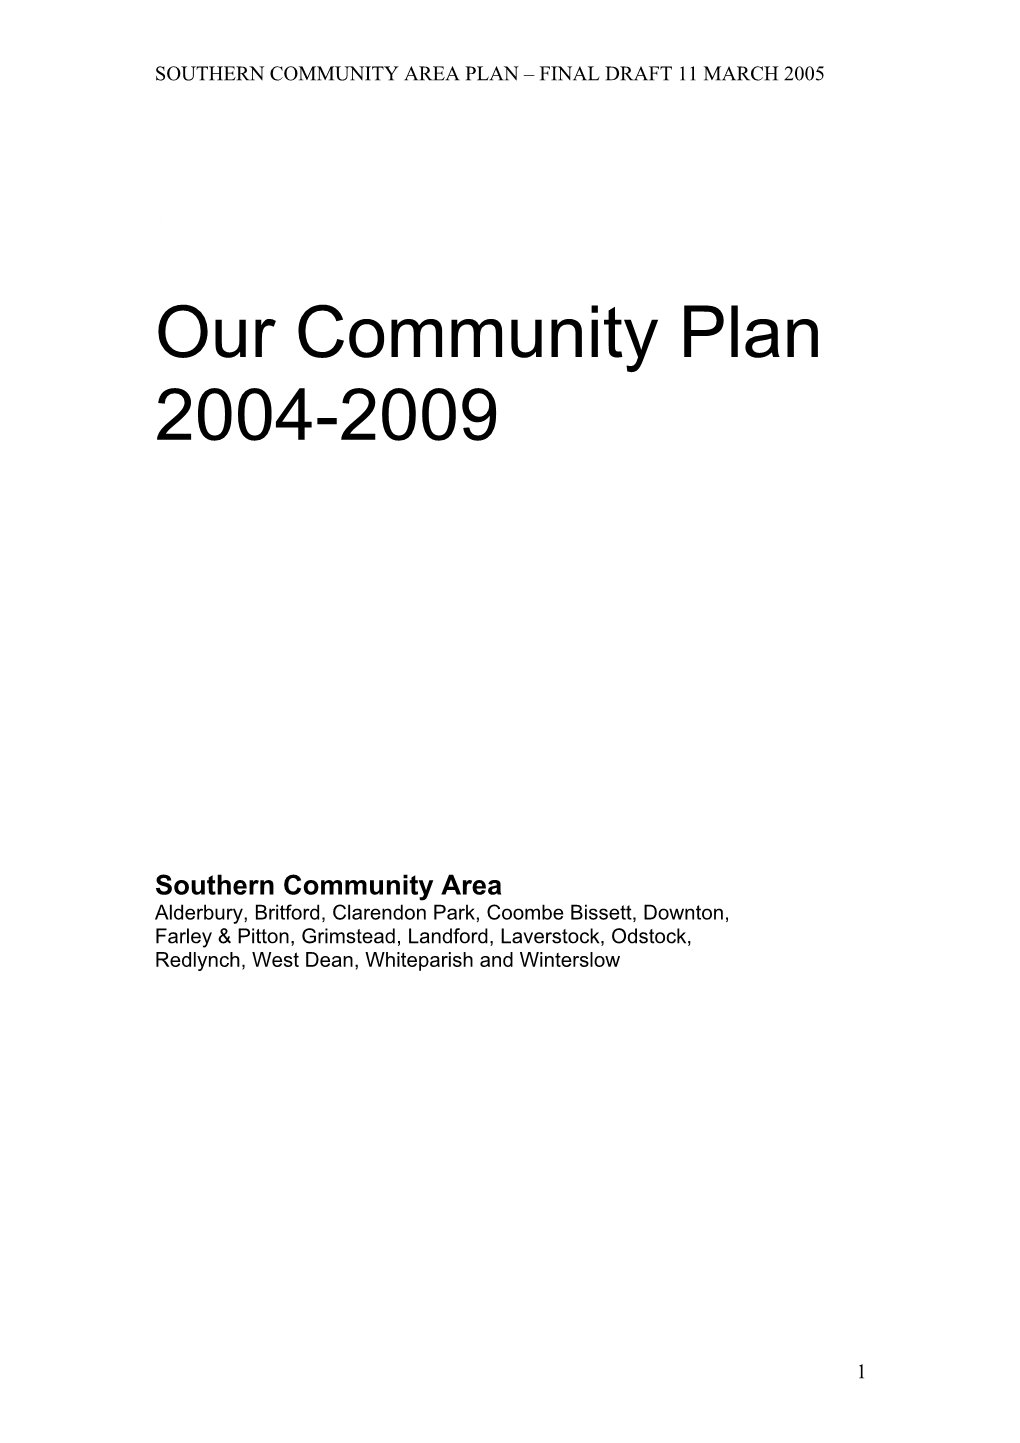 Our Community Plan 2004-2009